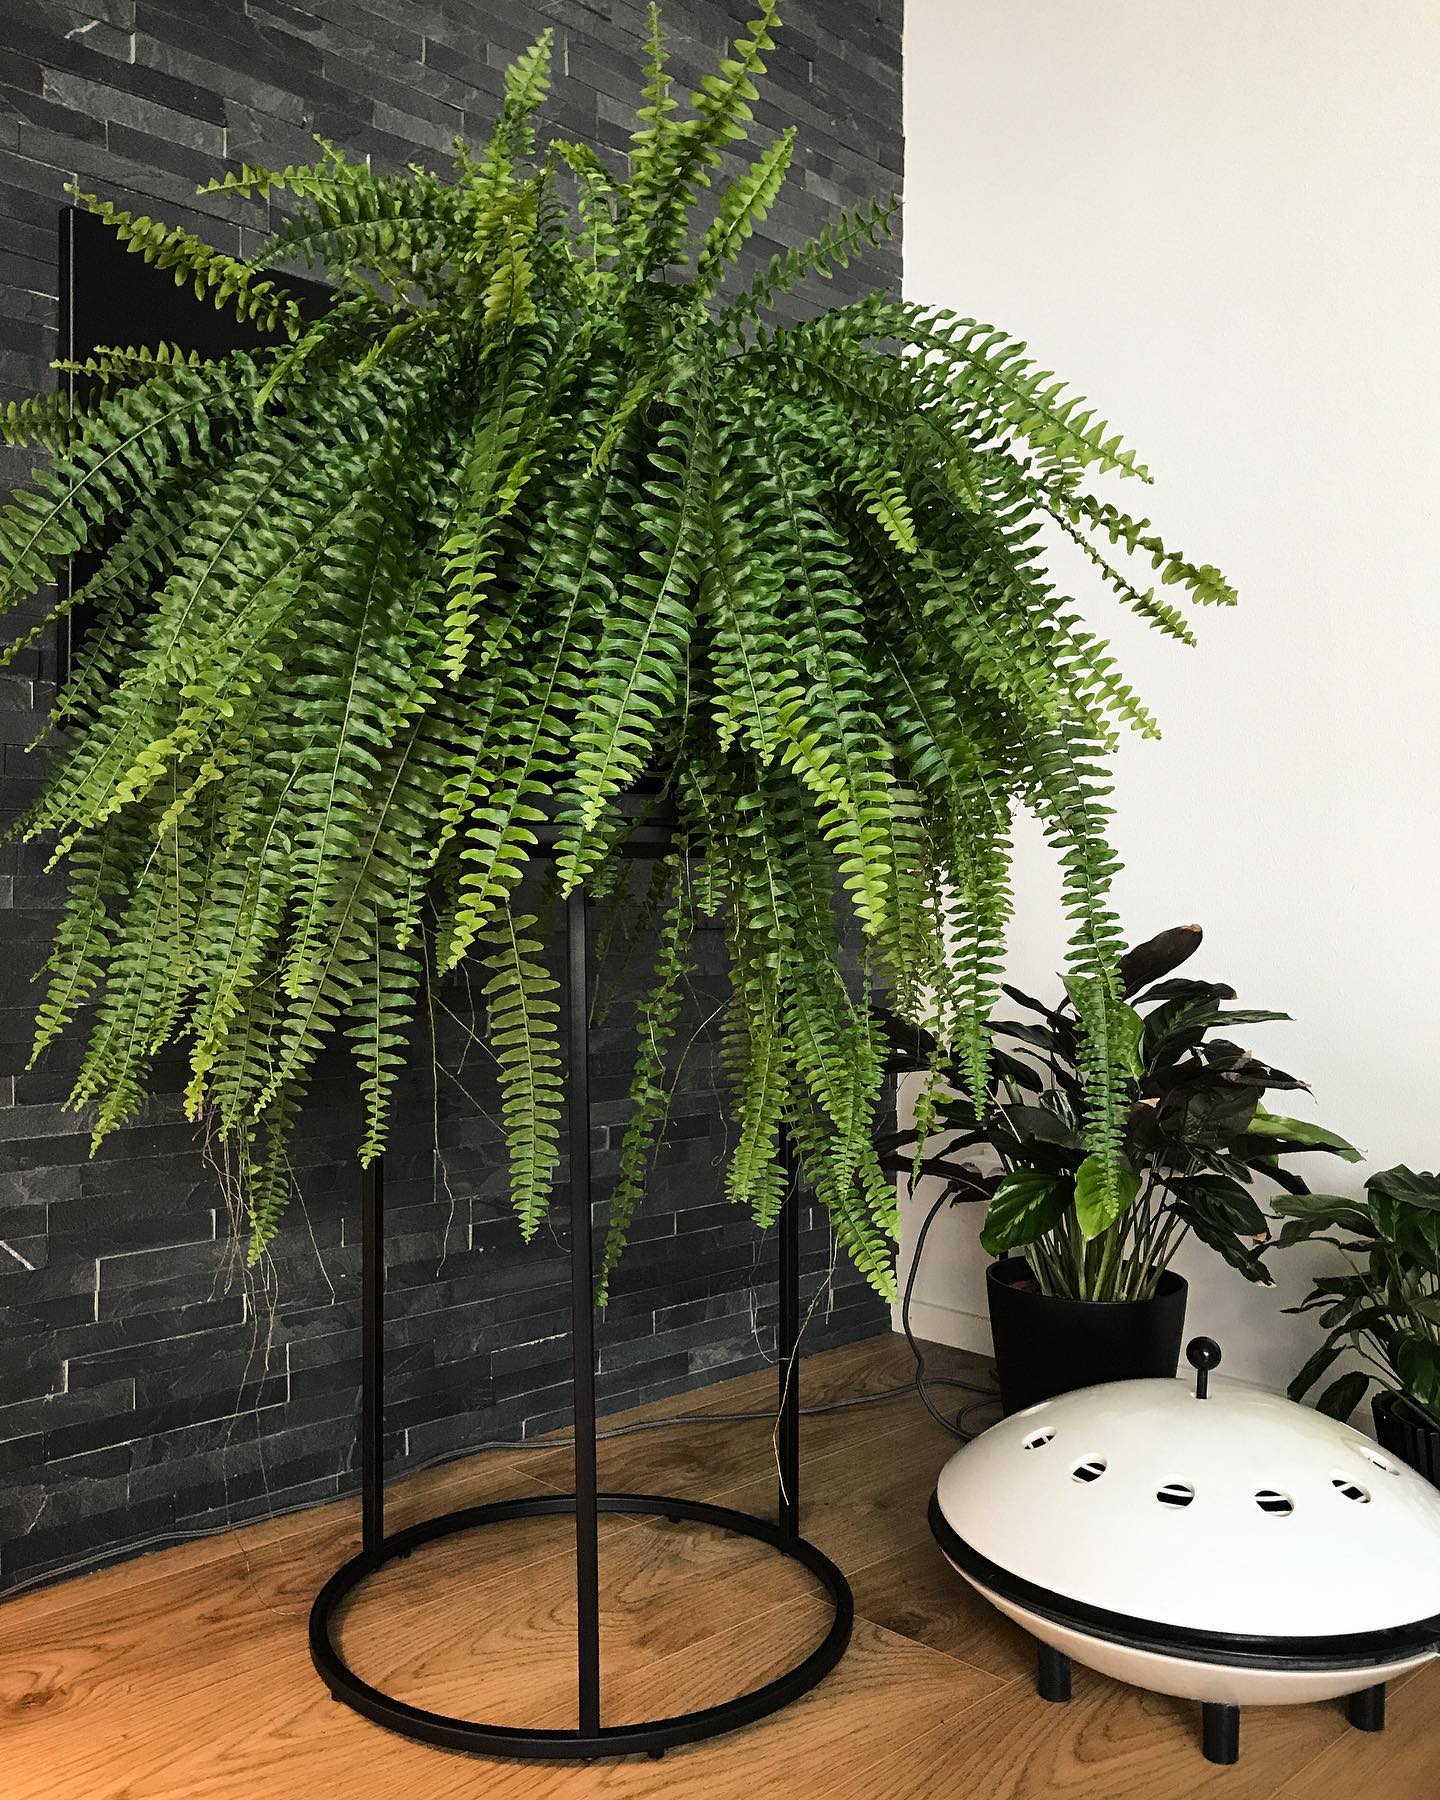 Boston Fern (Nephrolepis Exaltata) Indoor Plants That Clean the Air